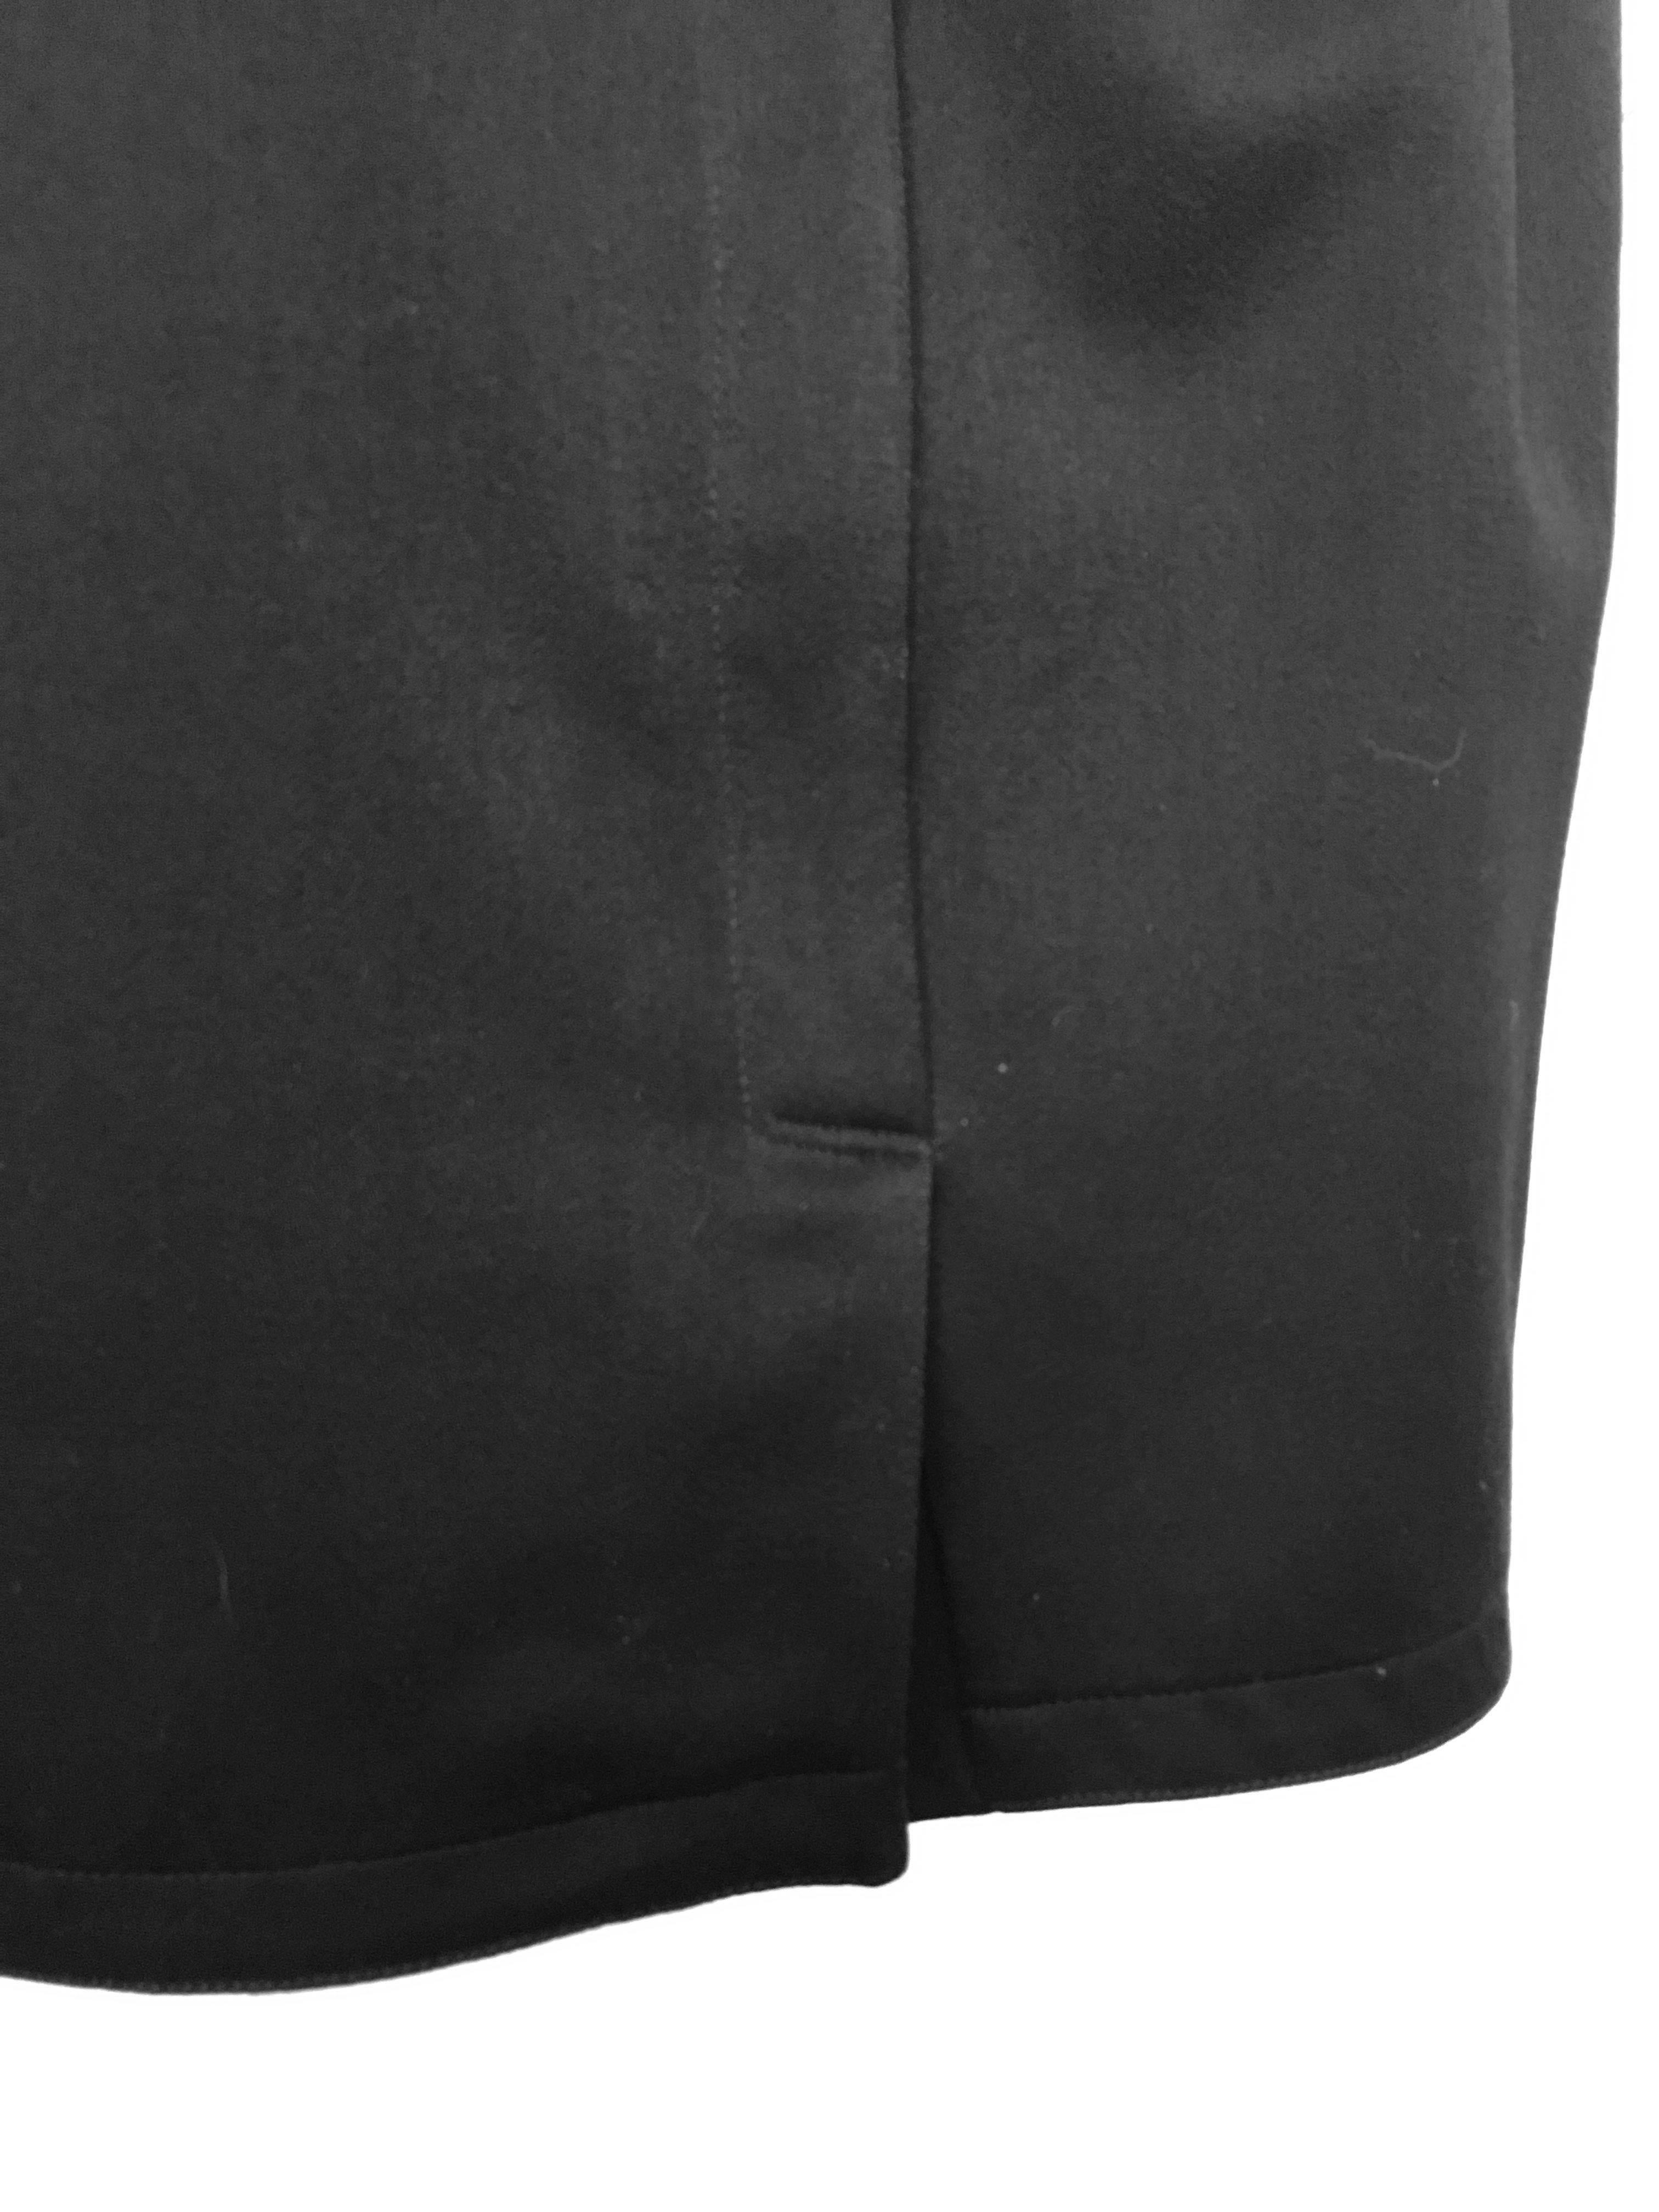 Gianni Versace 1980s Black Wool Skirt with Pockets Size 4.  In Excellent Condition For Sale In Atlanta, GA